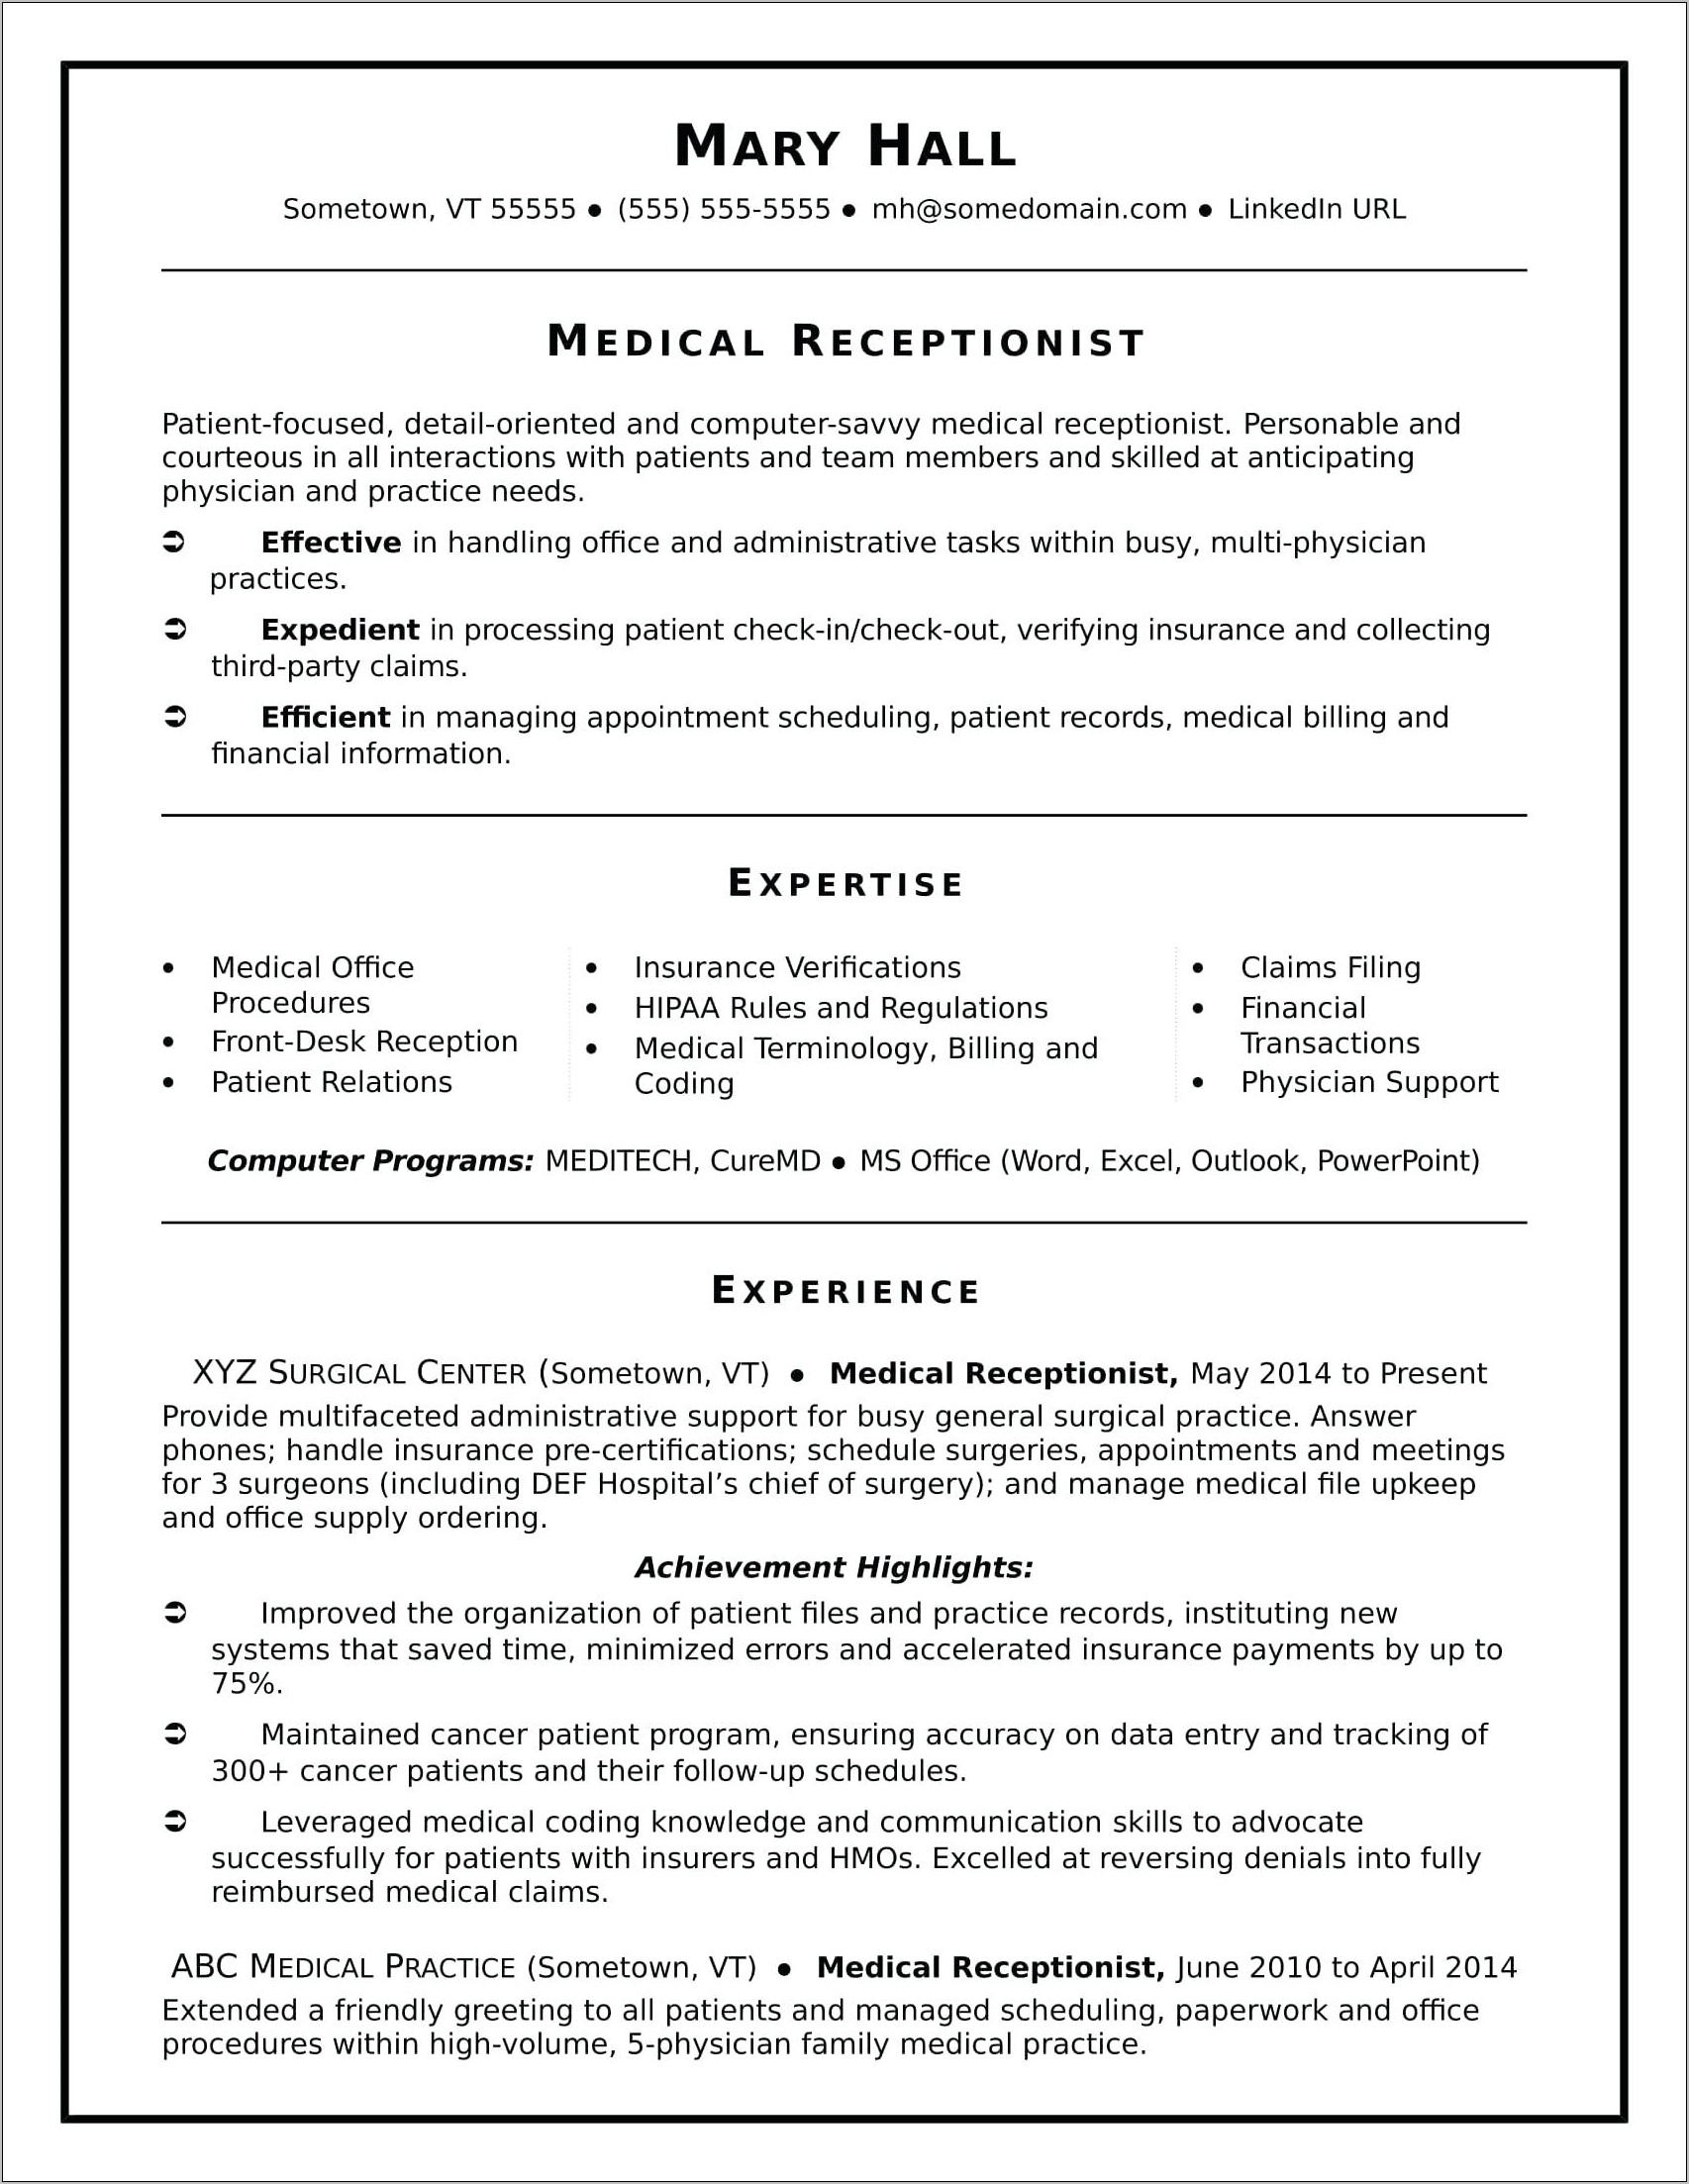 Resume Example For Medical Receptionist